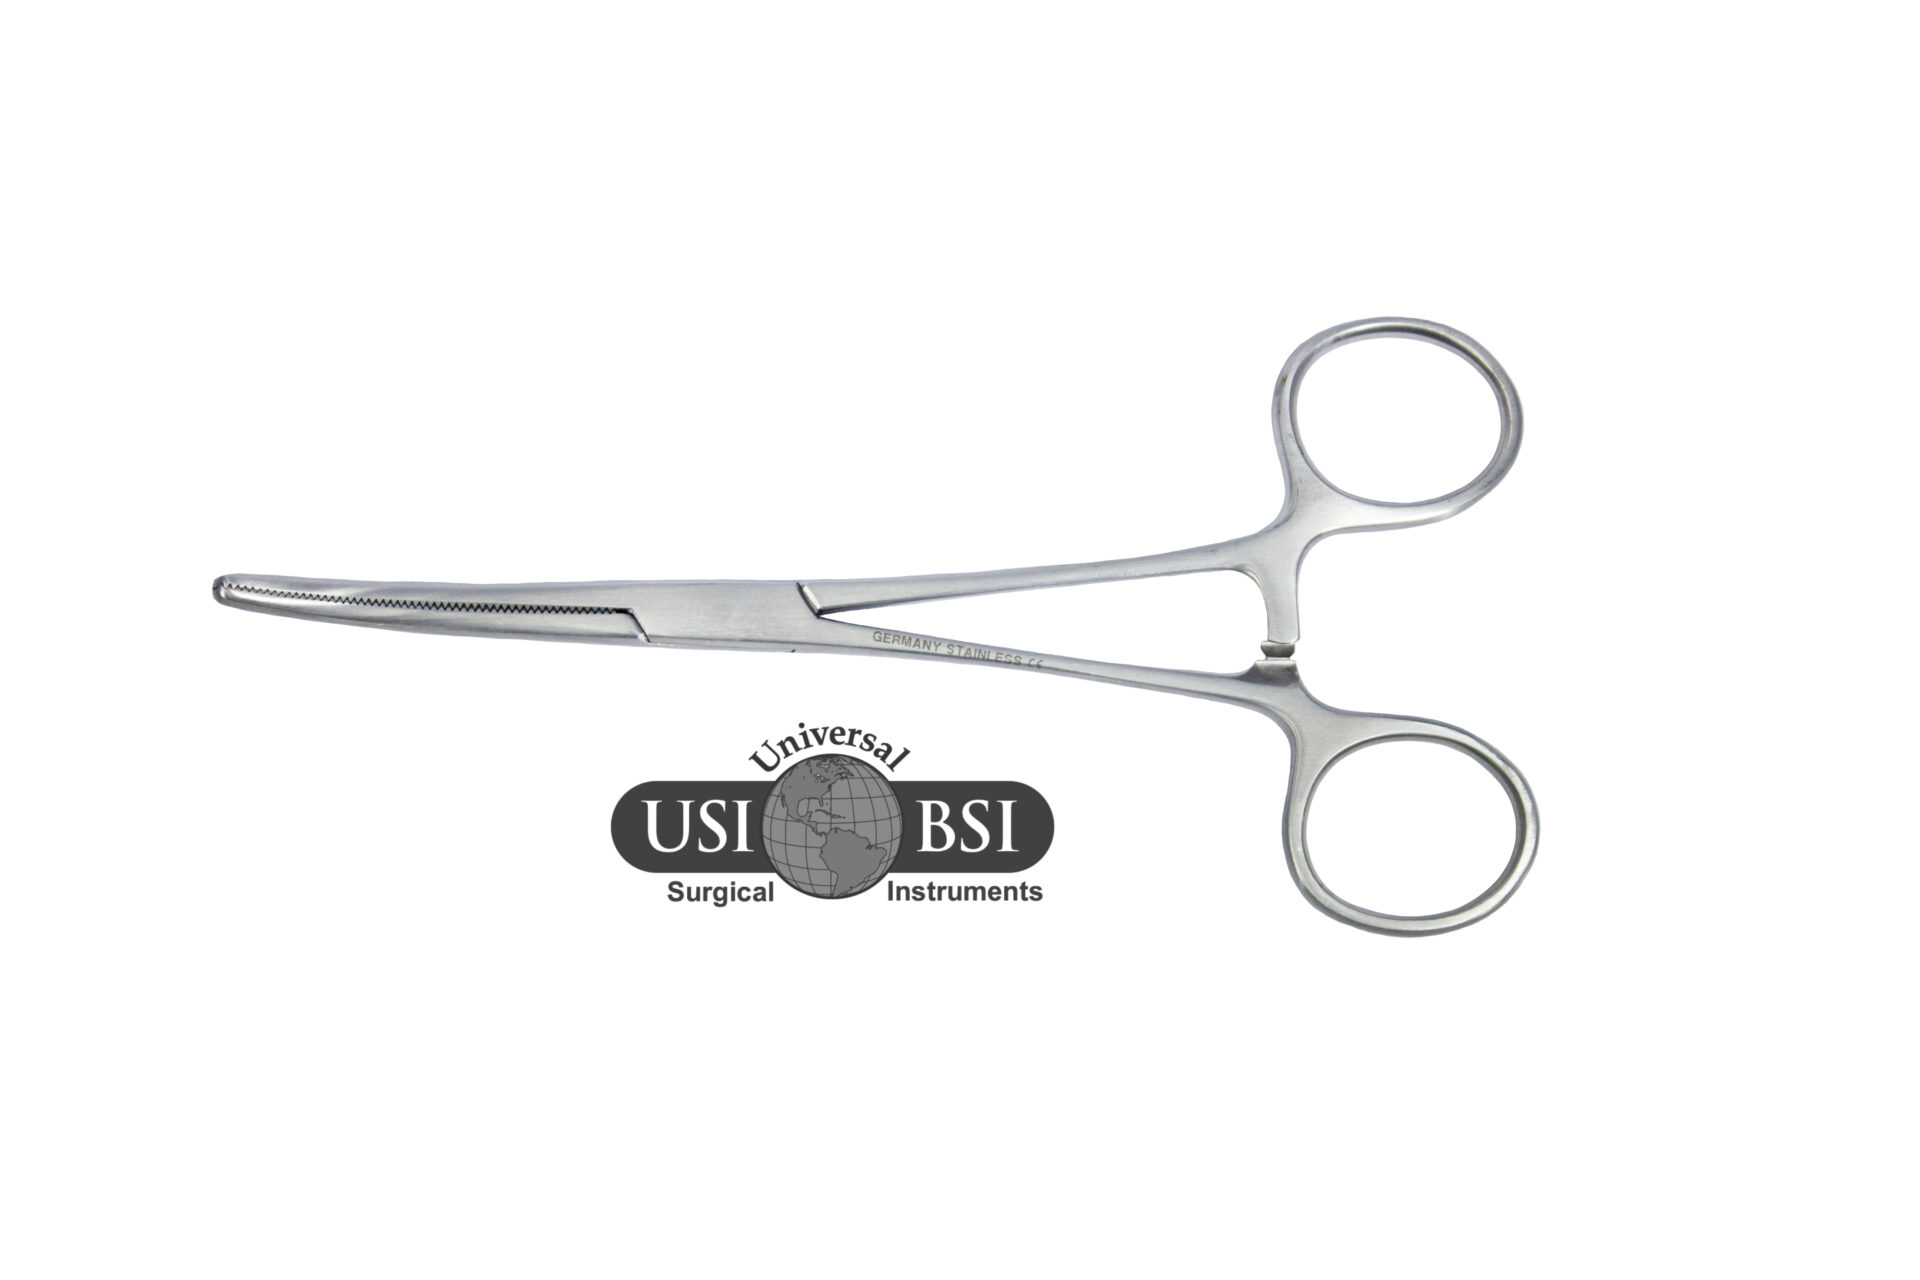 A pair of scissors with a small logo on the bottom.